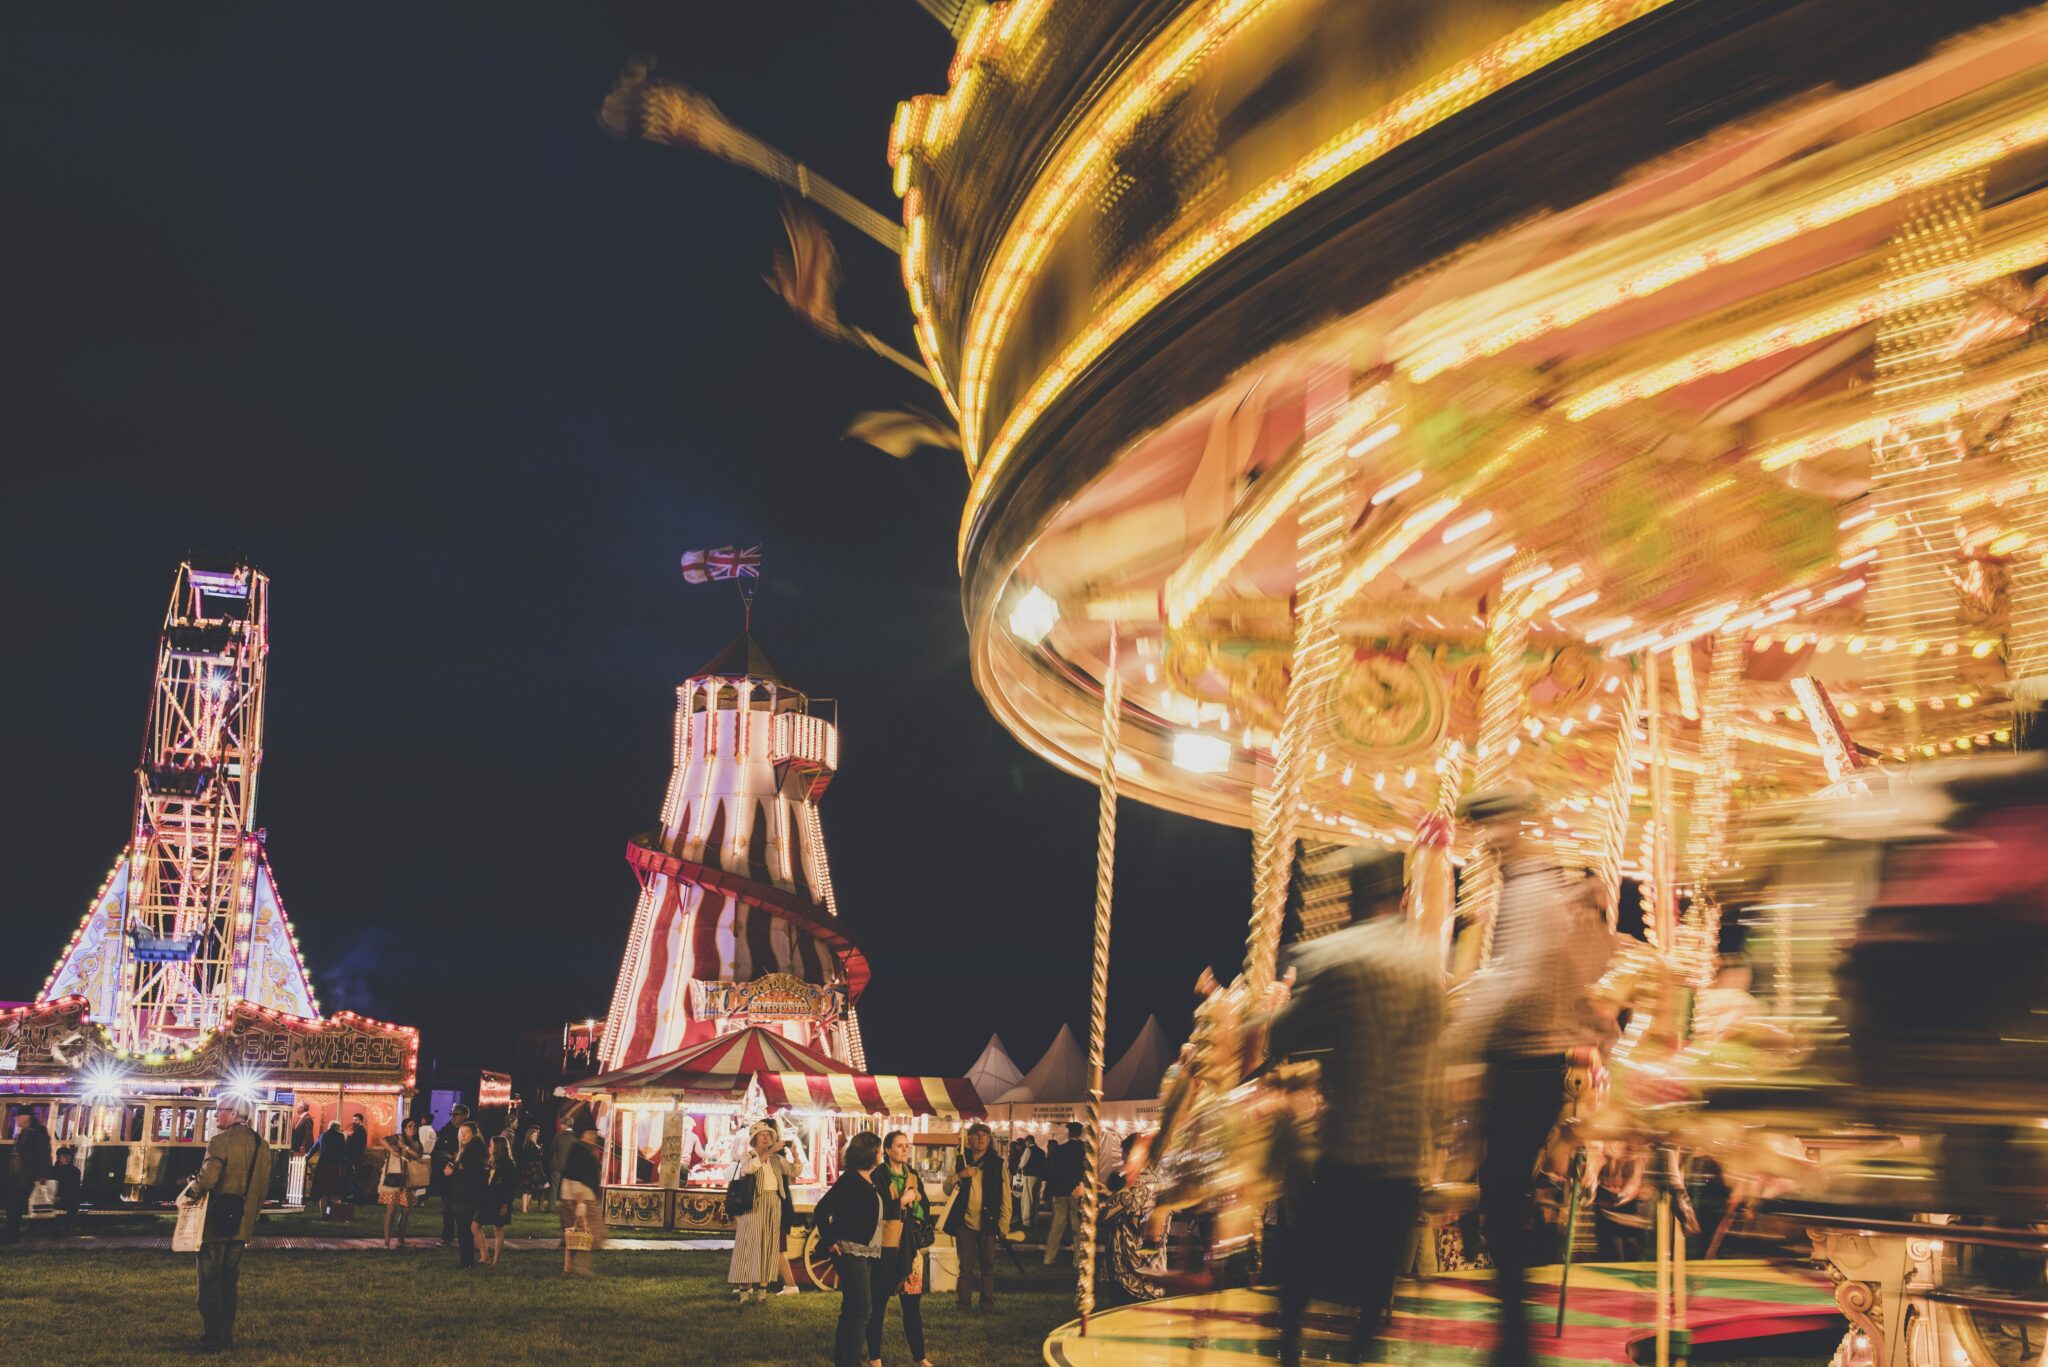 Carousel and other fairground rights at nighttime at Goodwood